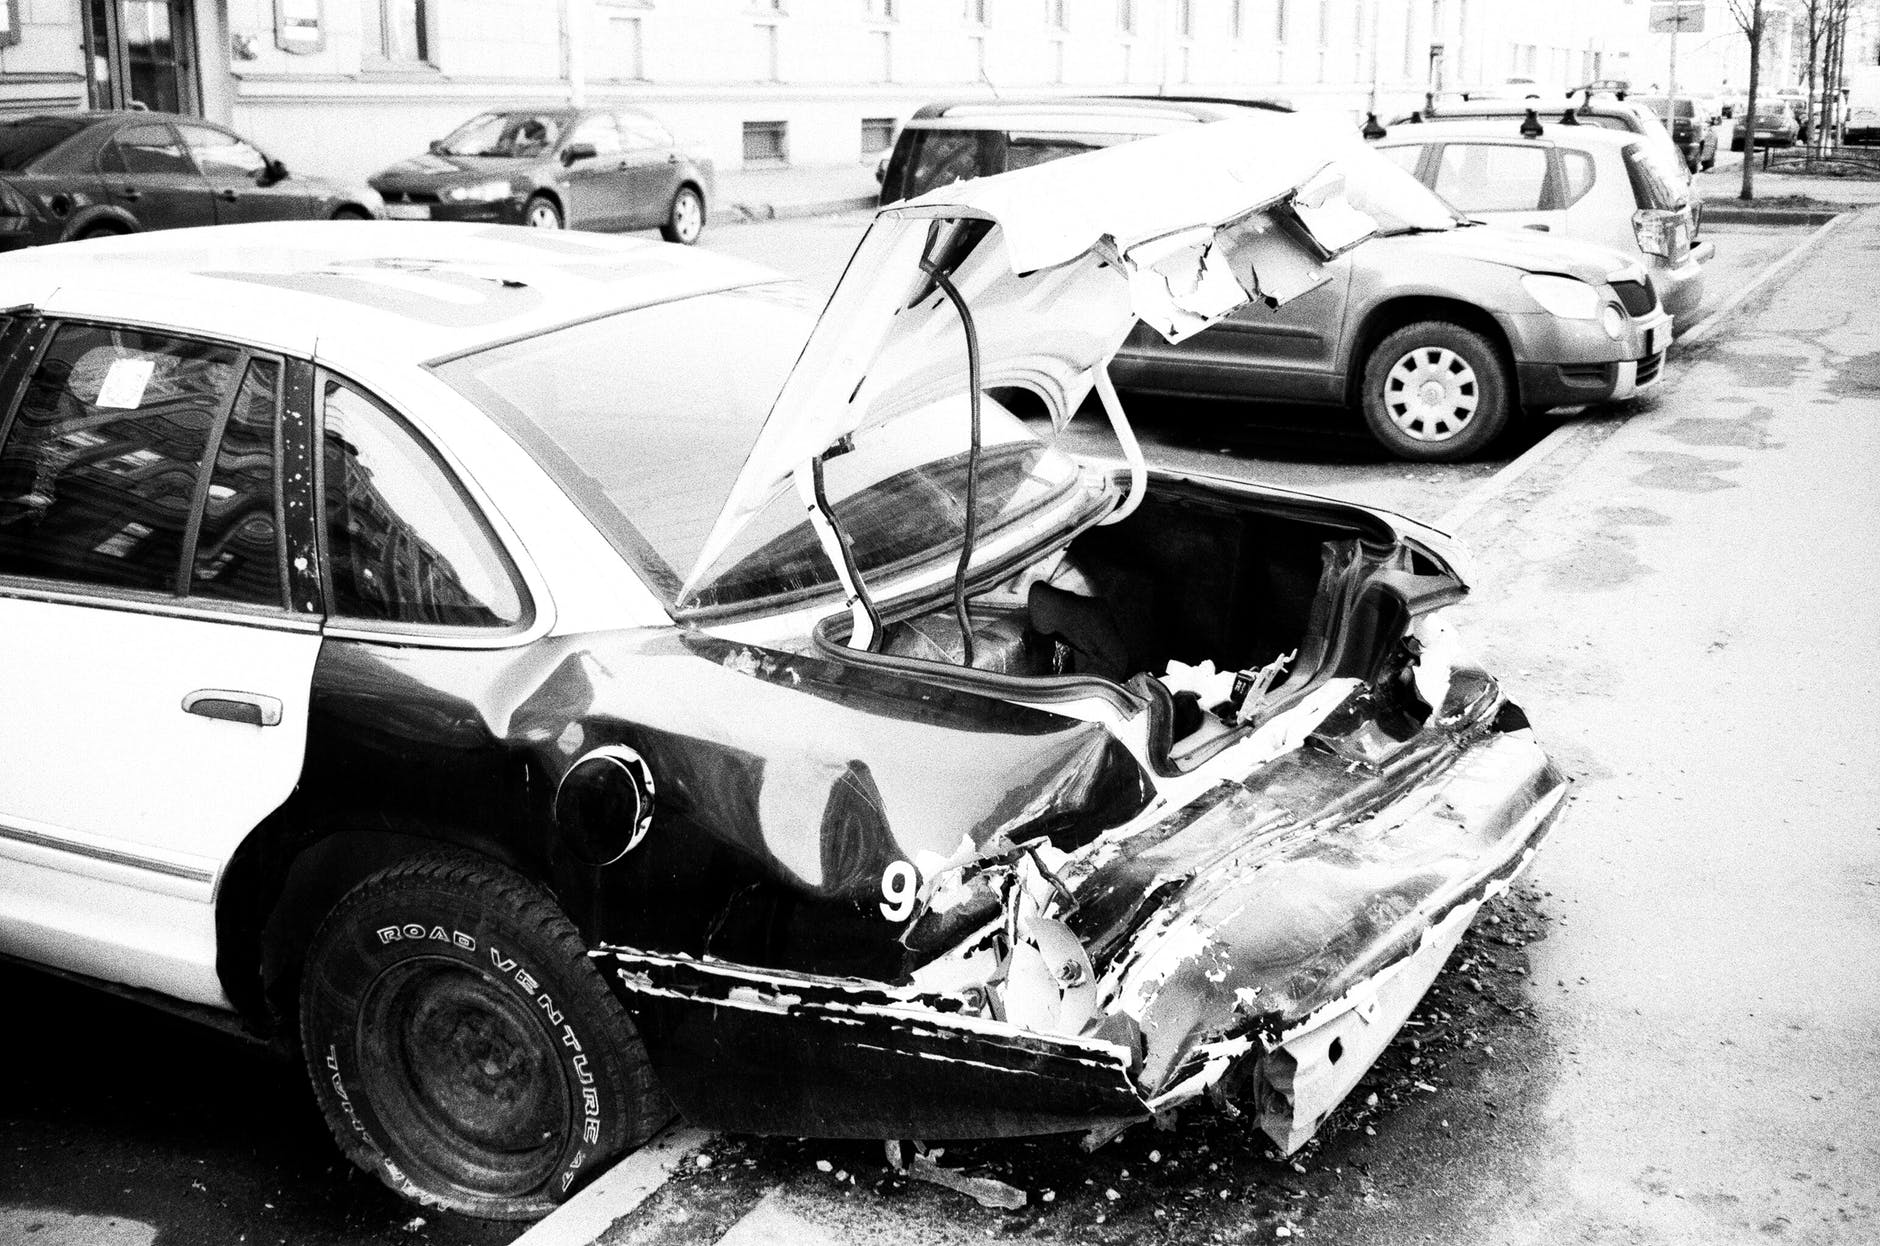 What to Do With the Car after a Traffic Accident